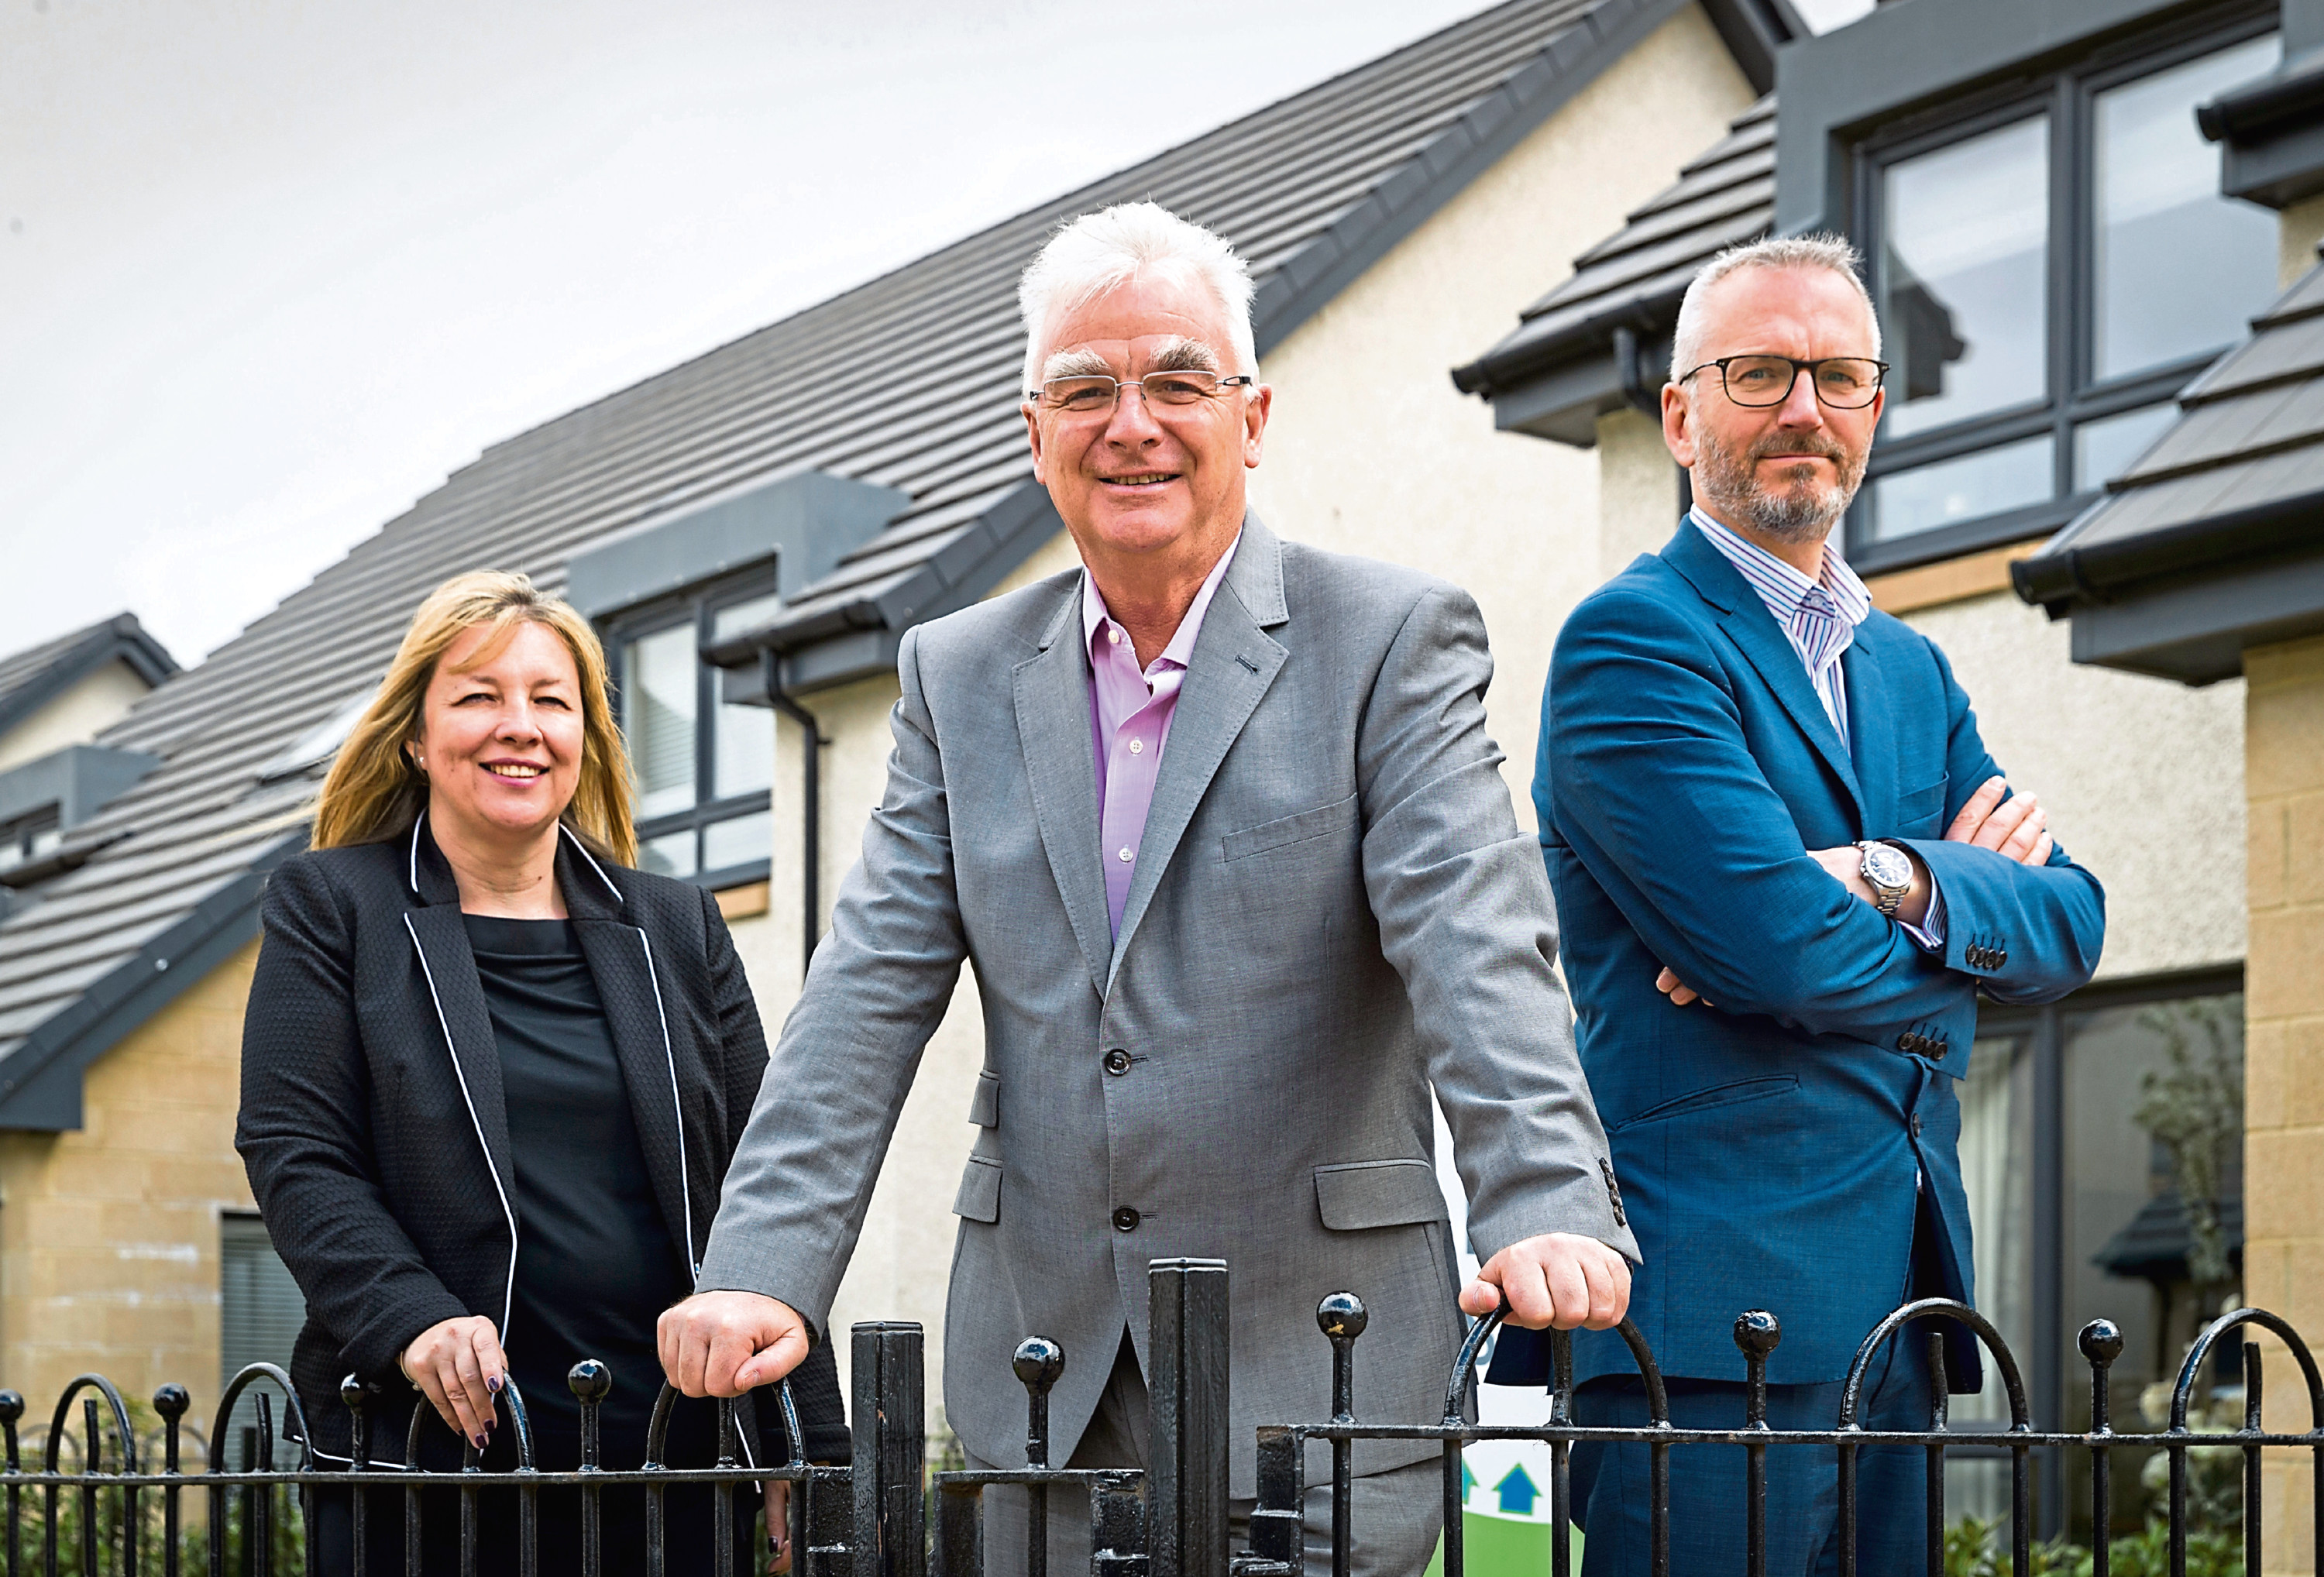 Springfield Homes board members Alexander Adam - Chairman, Innes Smith (beard) - Managing Director & Michelle Motion - Finance Director, photographed at the Springfield Homes development in Uddingston, near Glasgow on 20th April 2017.